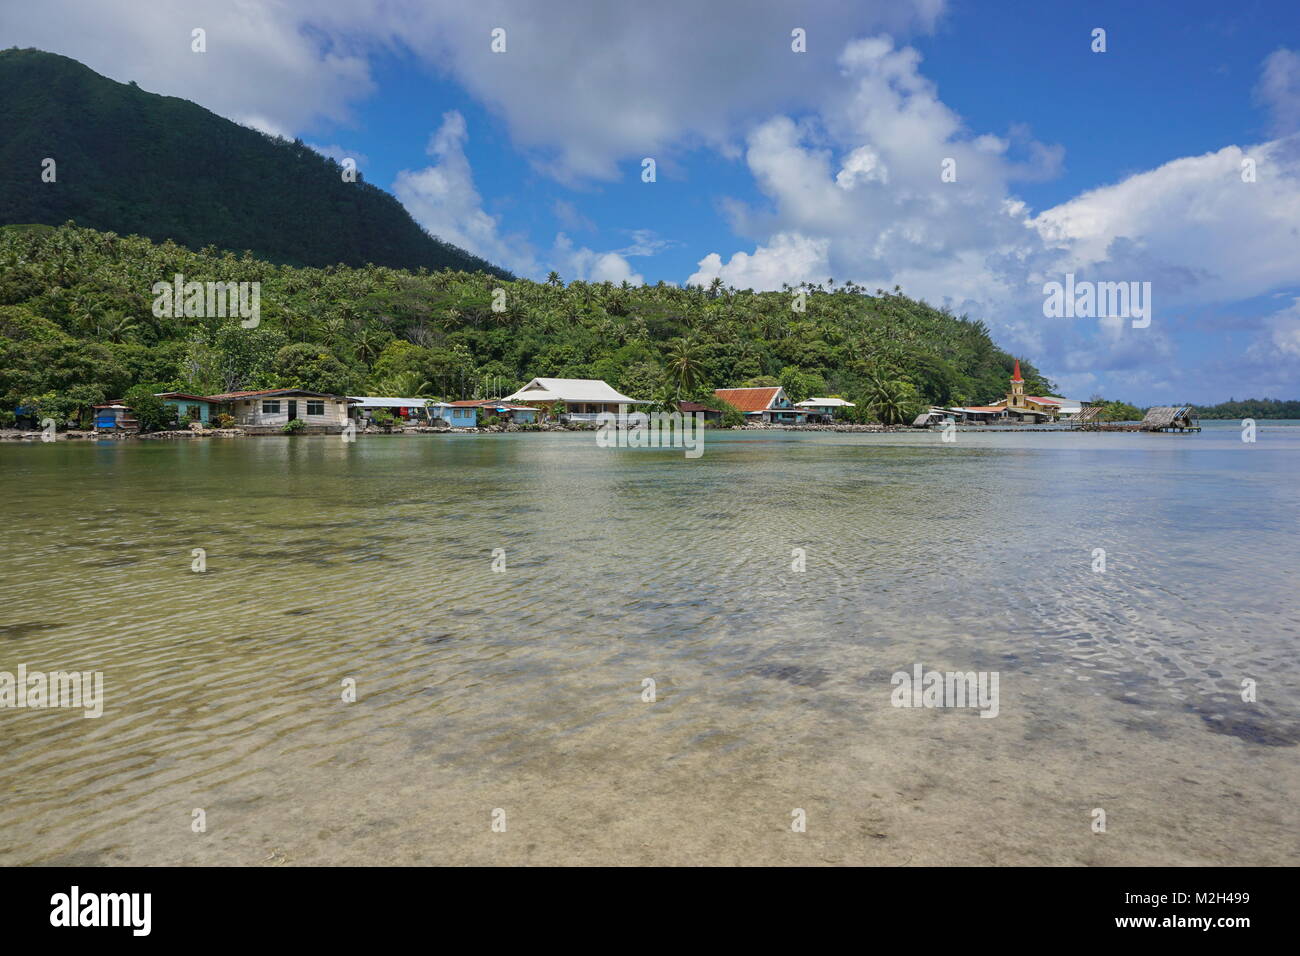 French Polynesia Huahine island, the village of Maeva on the shoreline of the saltwater lake Fauna Nui, south Pacific Stock Photo